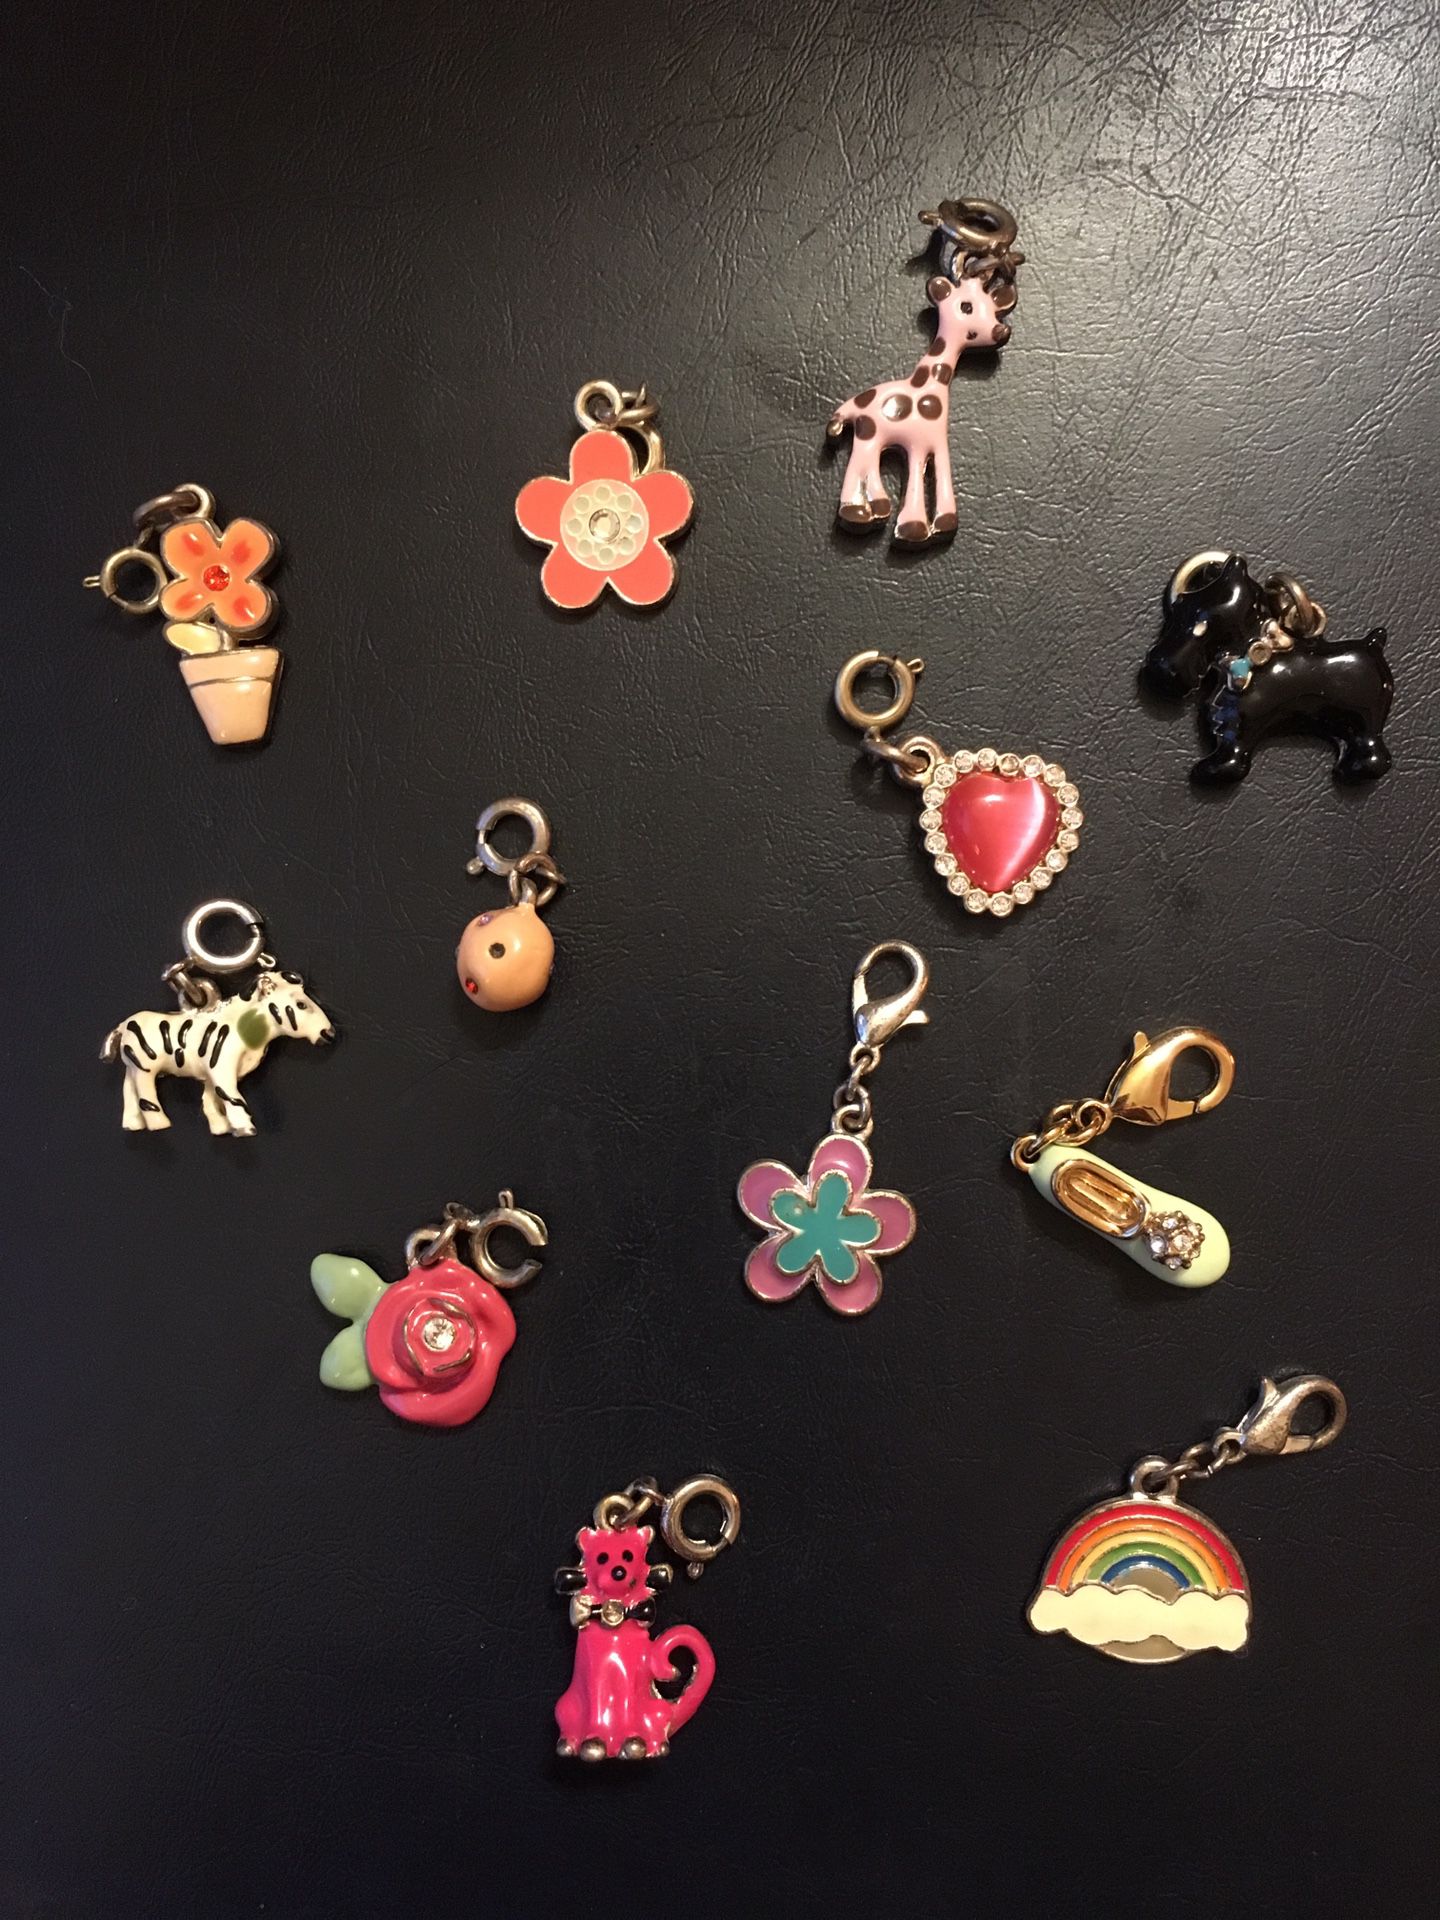 Gymboree Charms for bracelet (not included)